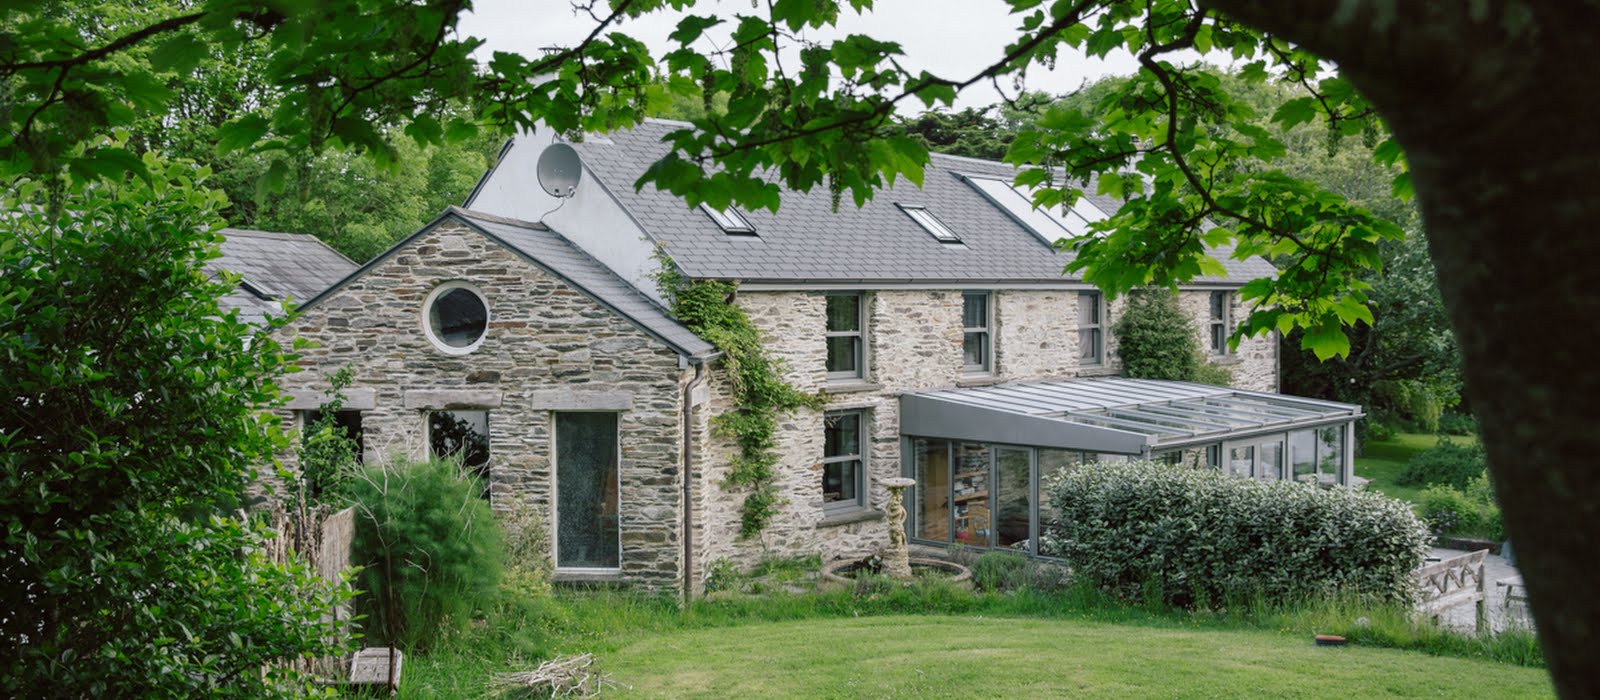 Take a tour of this stunning perfumers house, nestled between the trees in West Cork